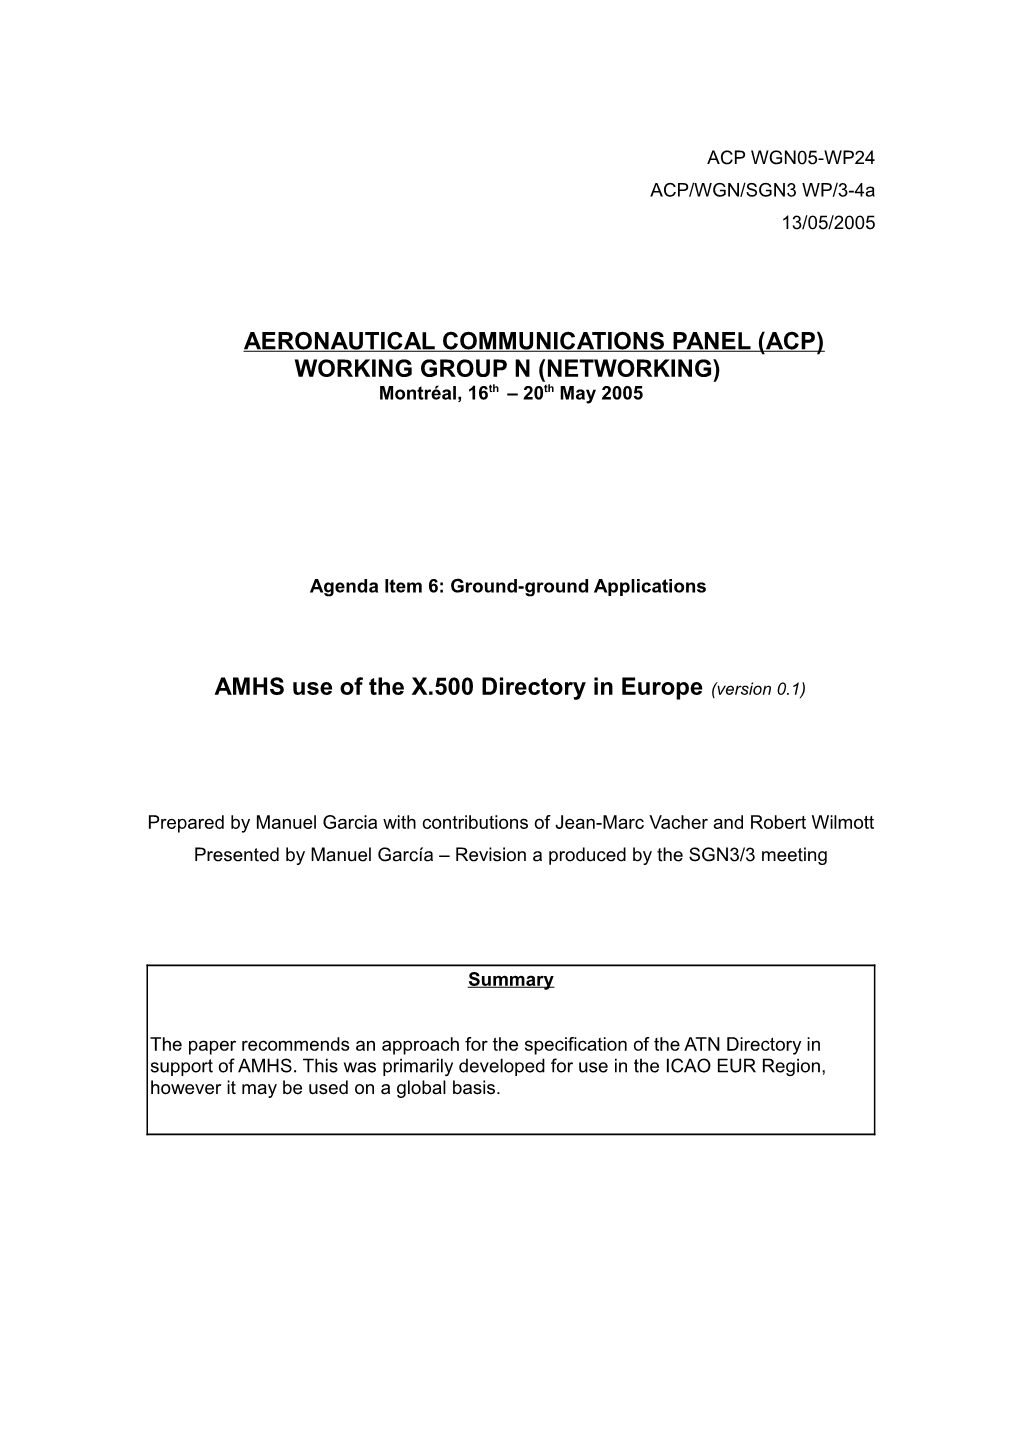 AMHS Use of the X.500 Directory in Europe